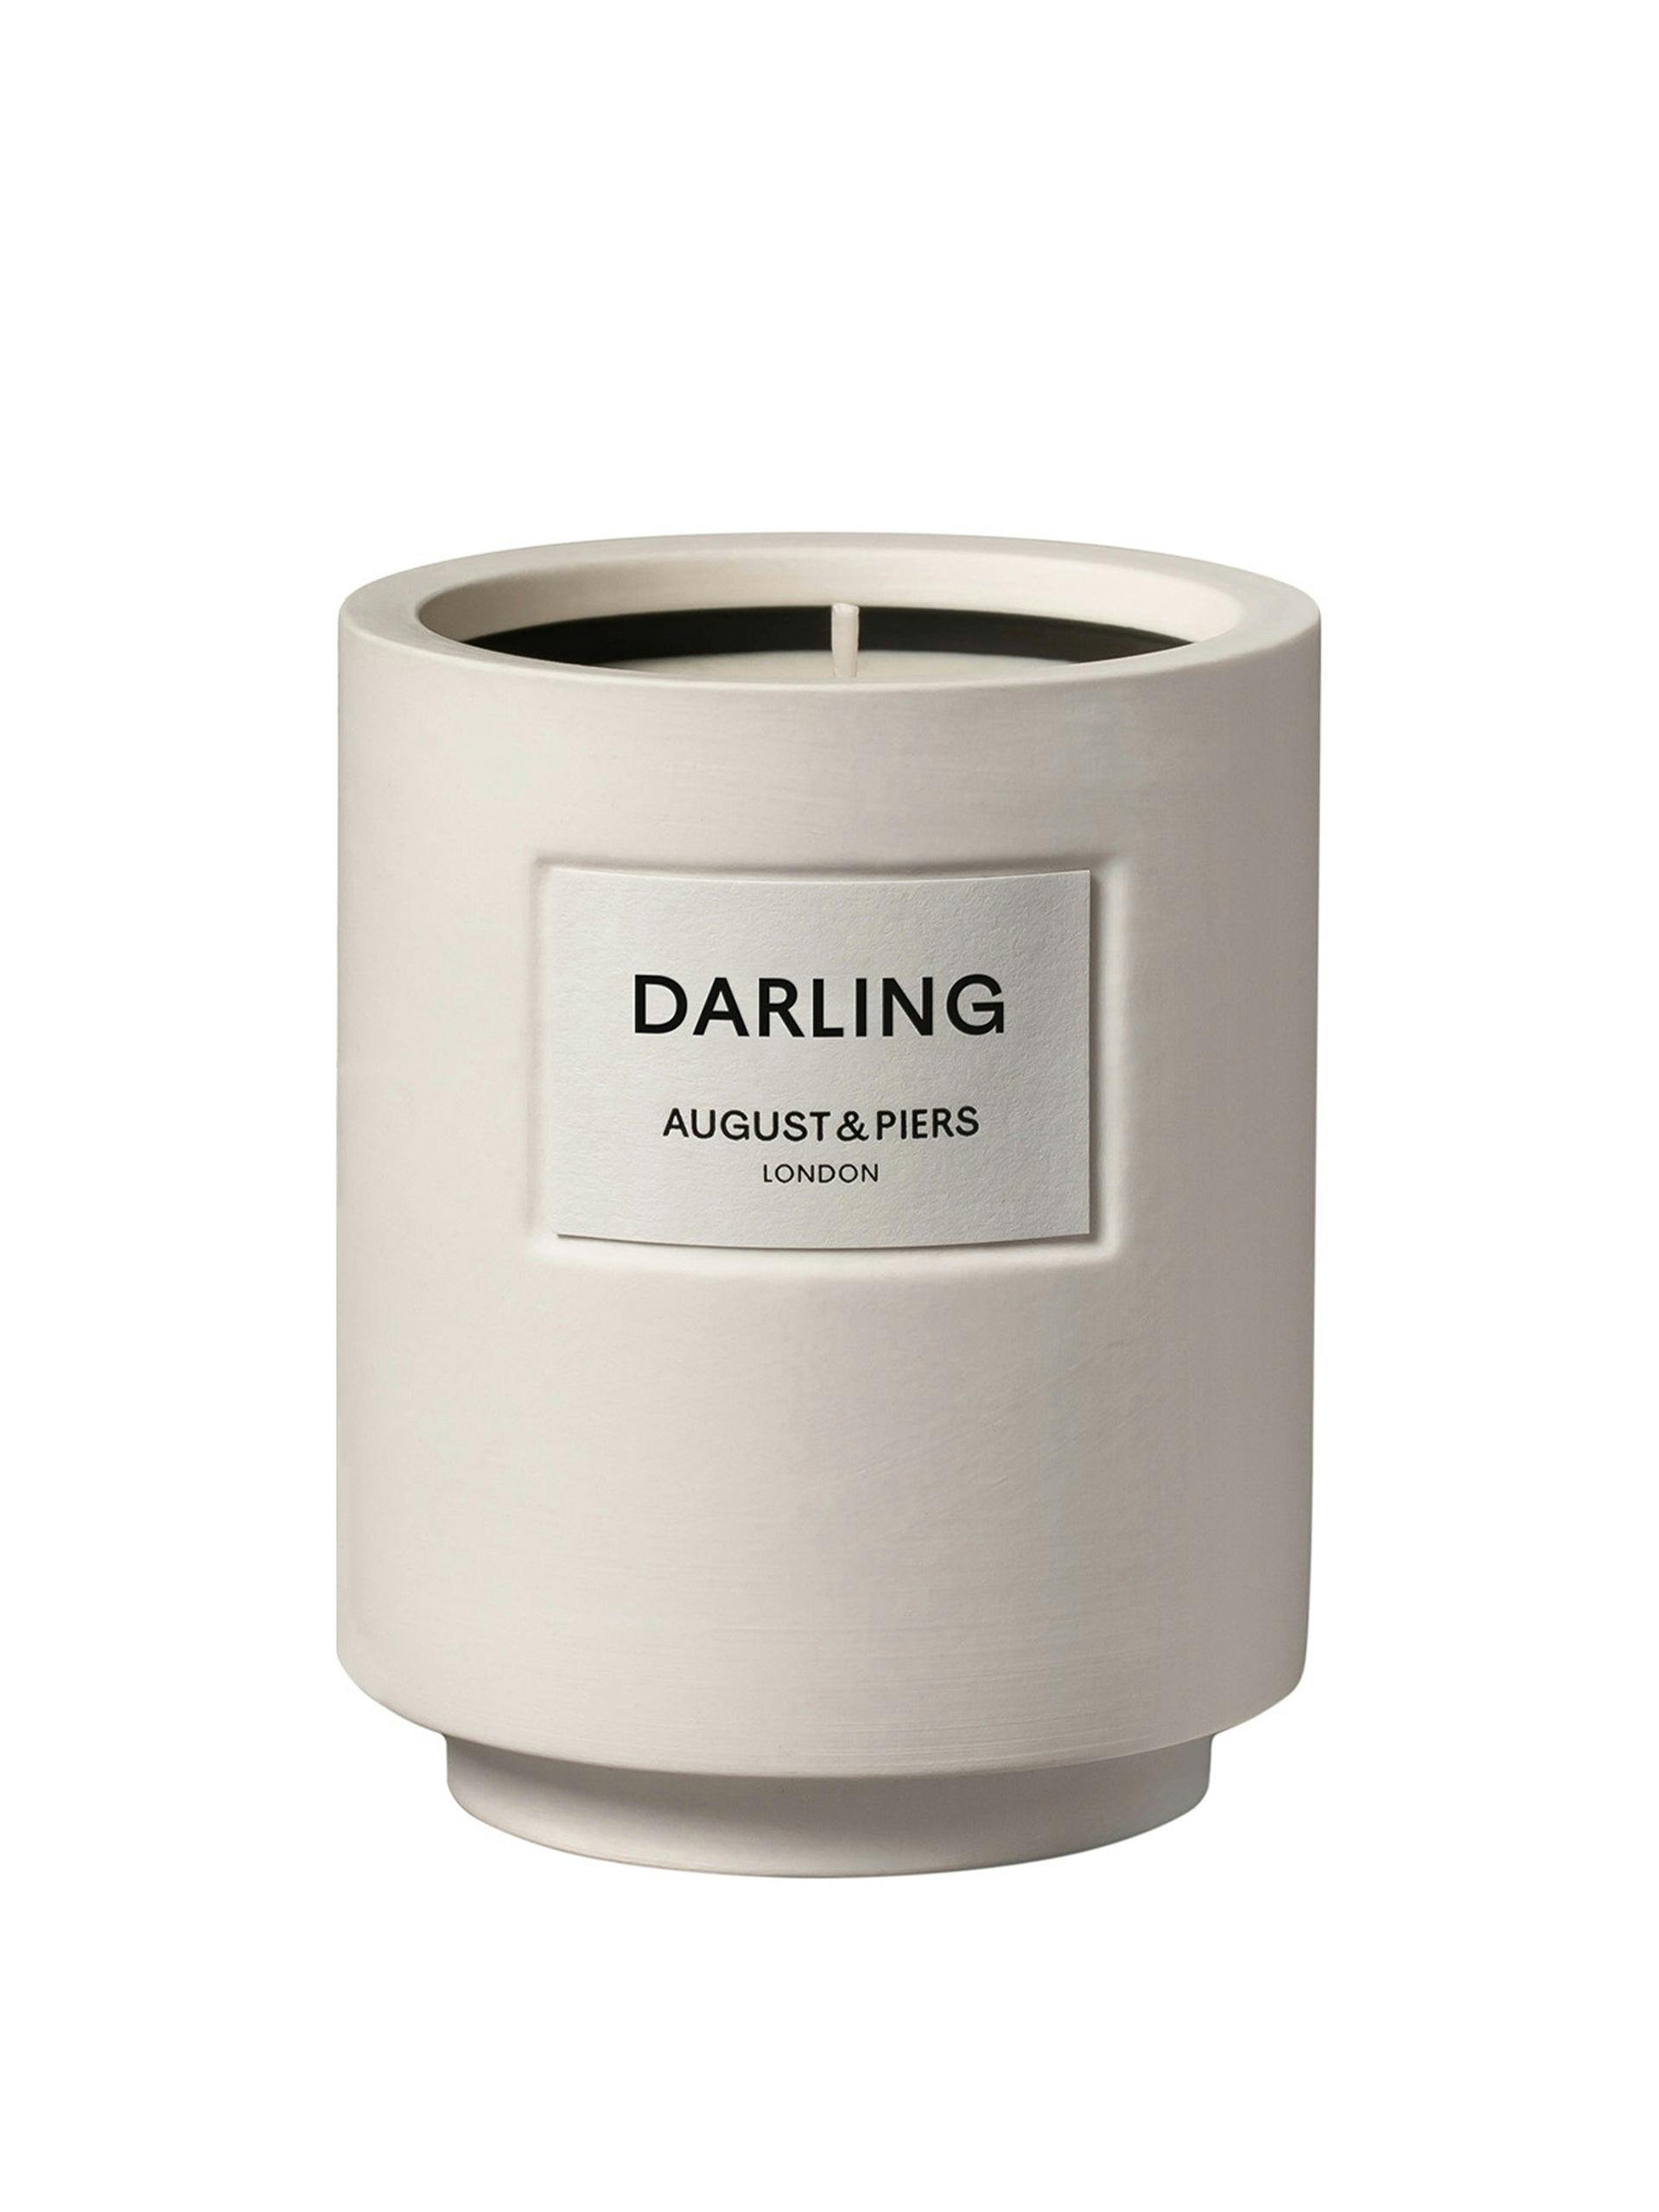 Darling scented candle